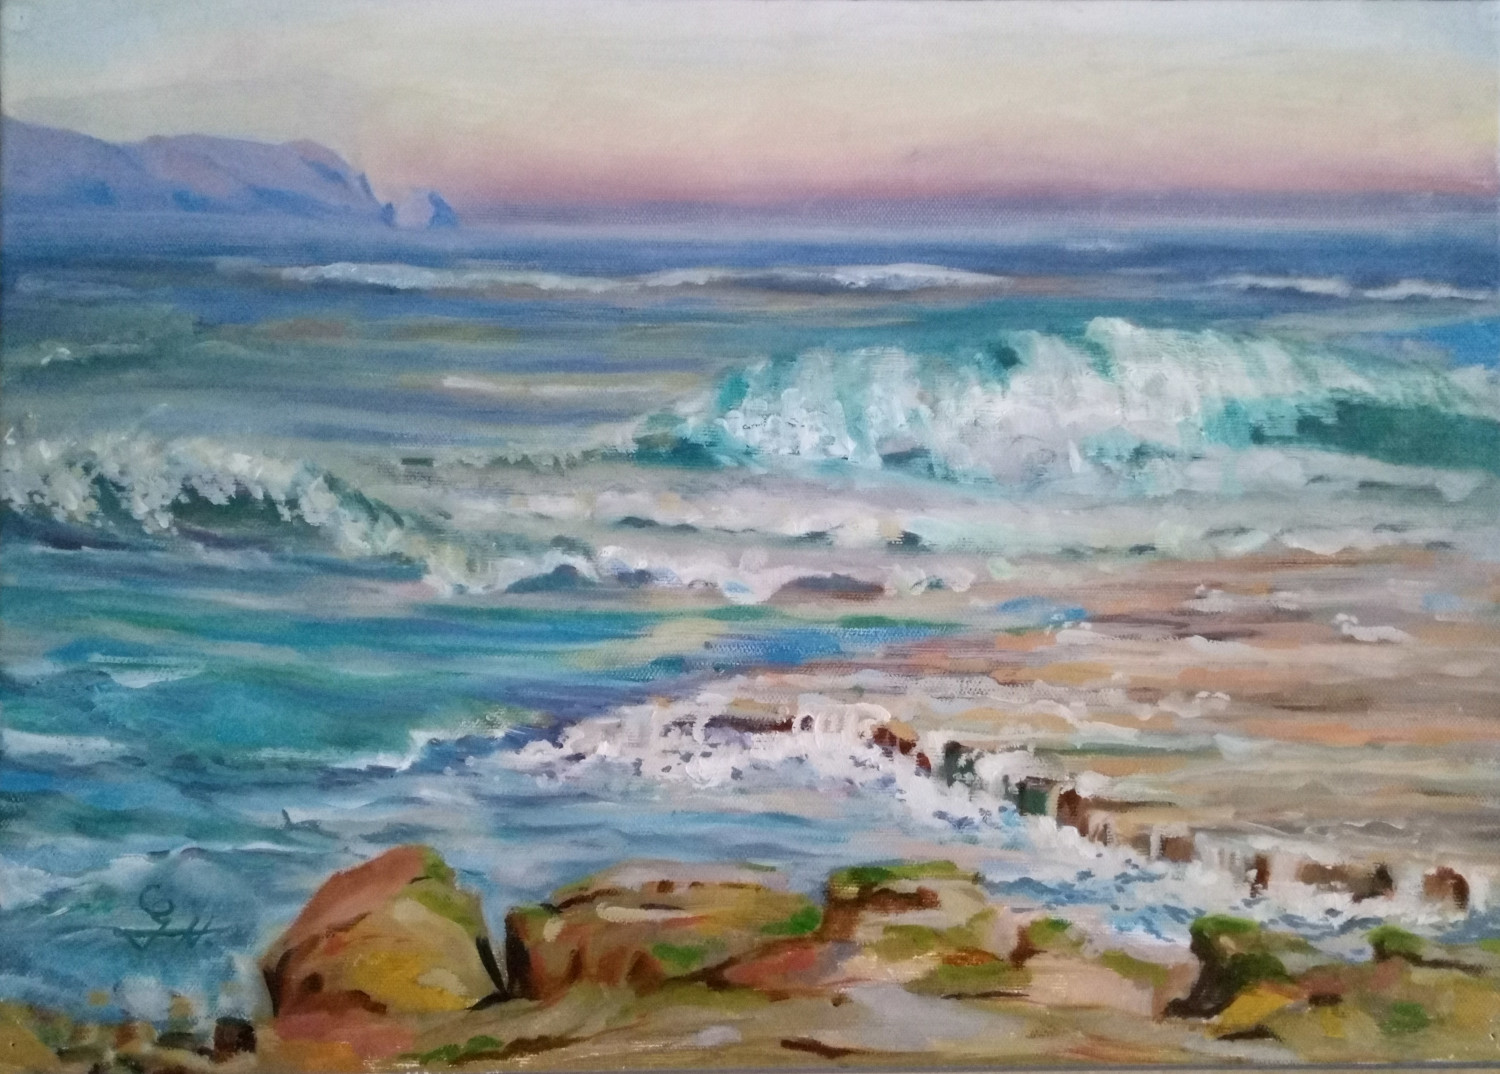 Fighting waves - painting oil on canvas